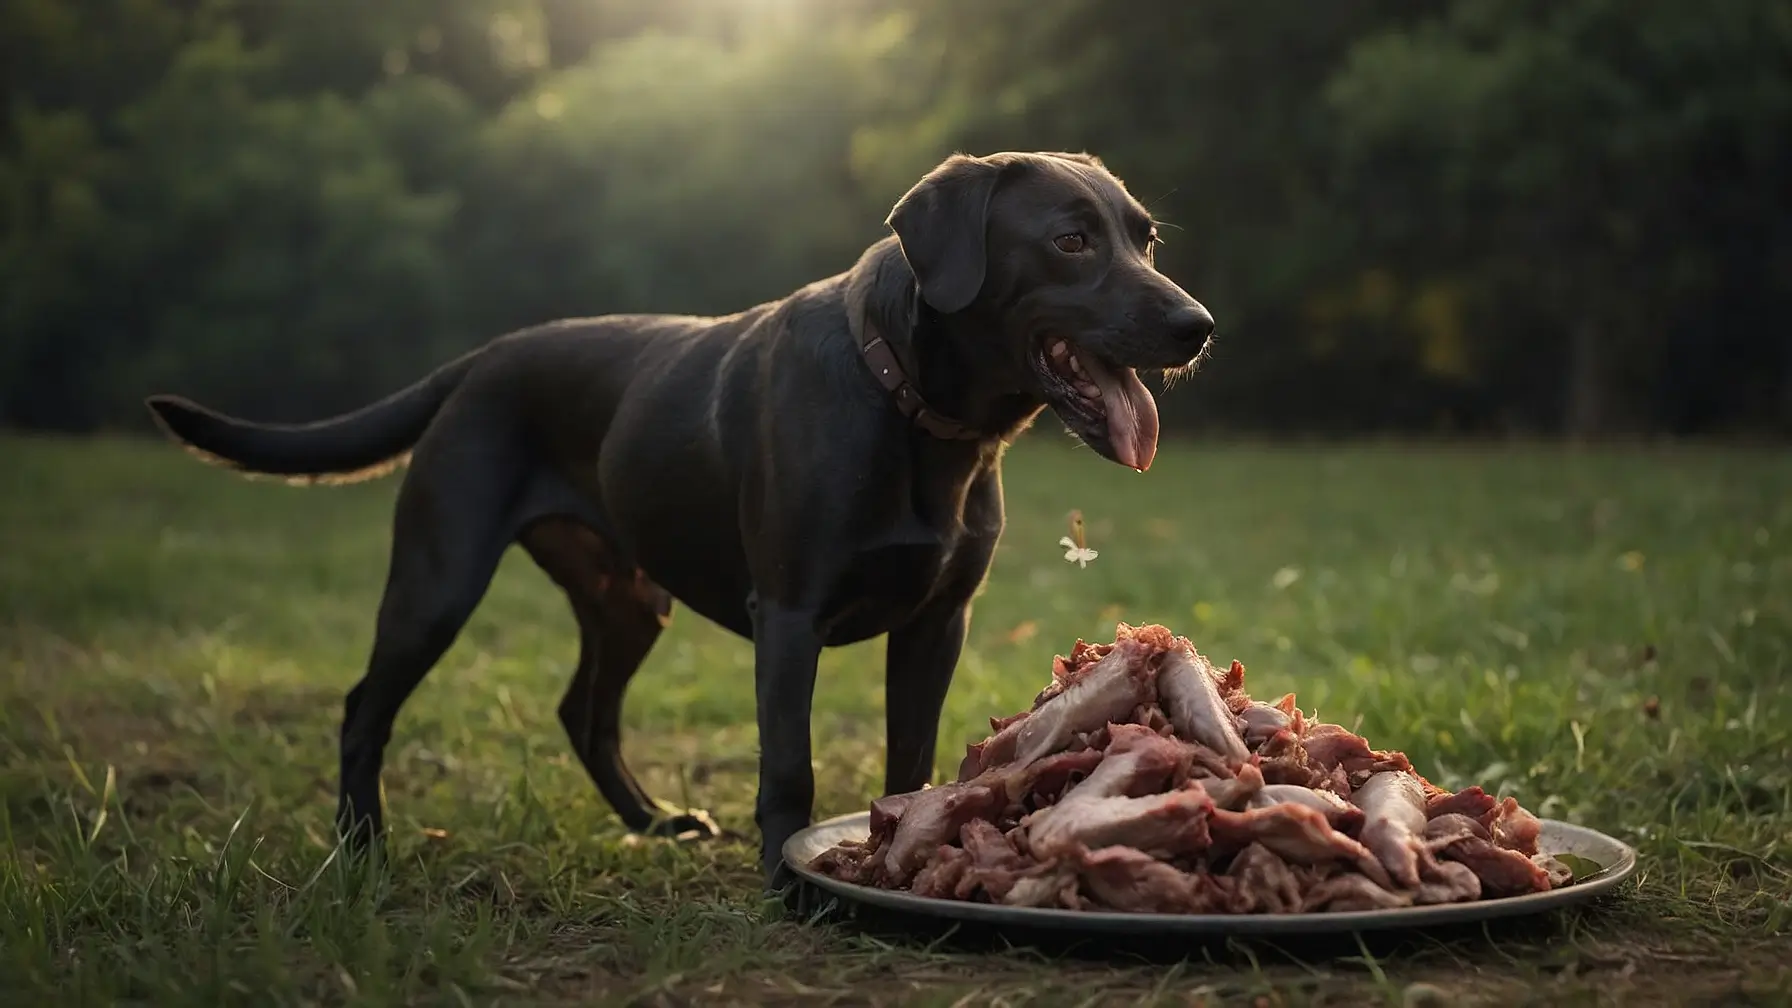 Can dogs eat dove meat?